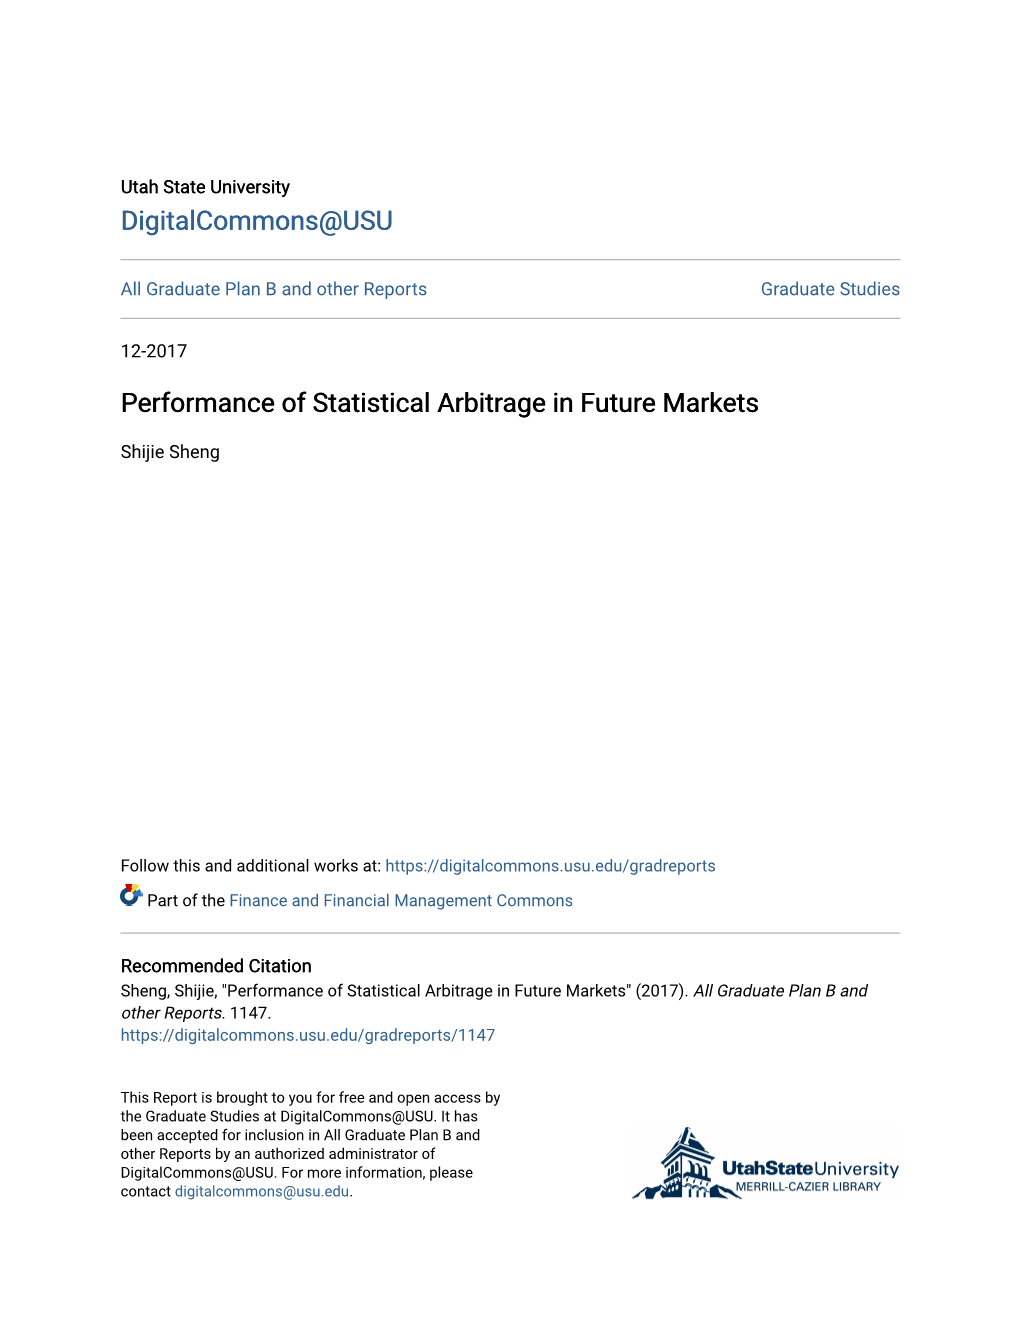 Performance of Statistical Arbitrage in Future Markets